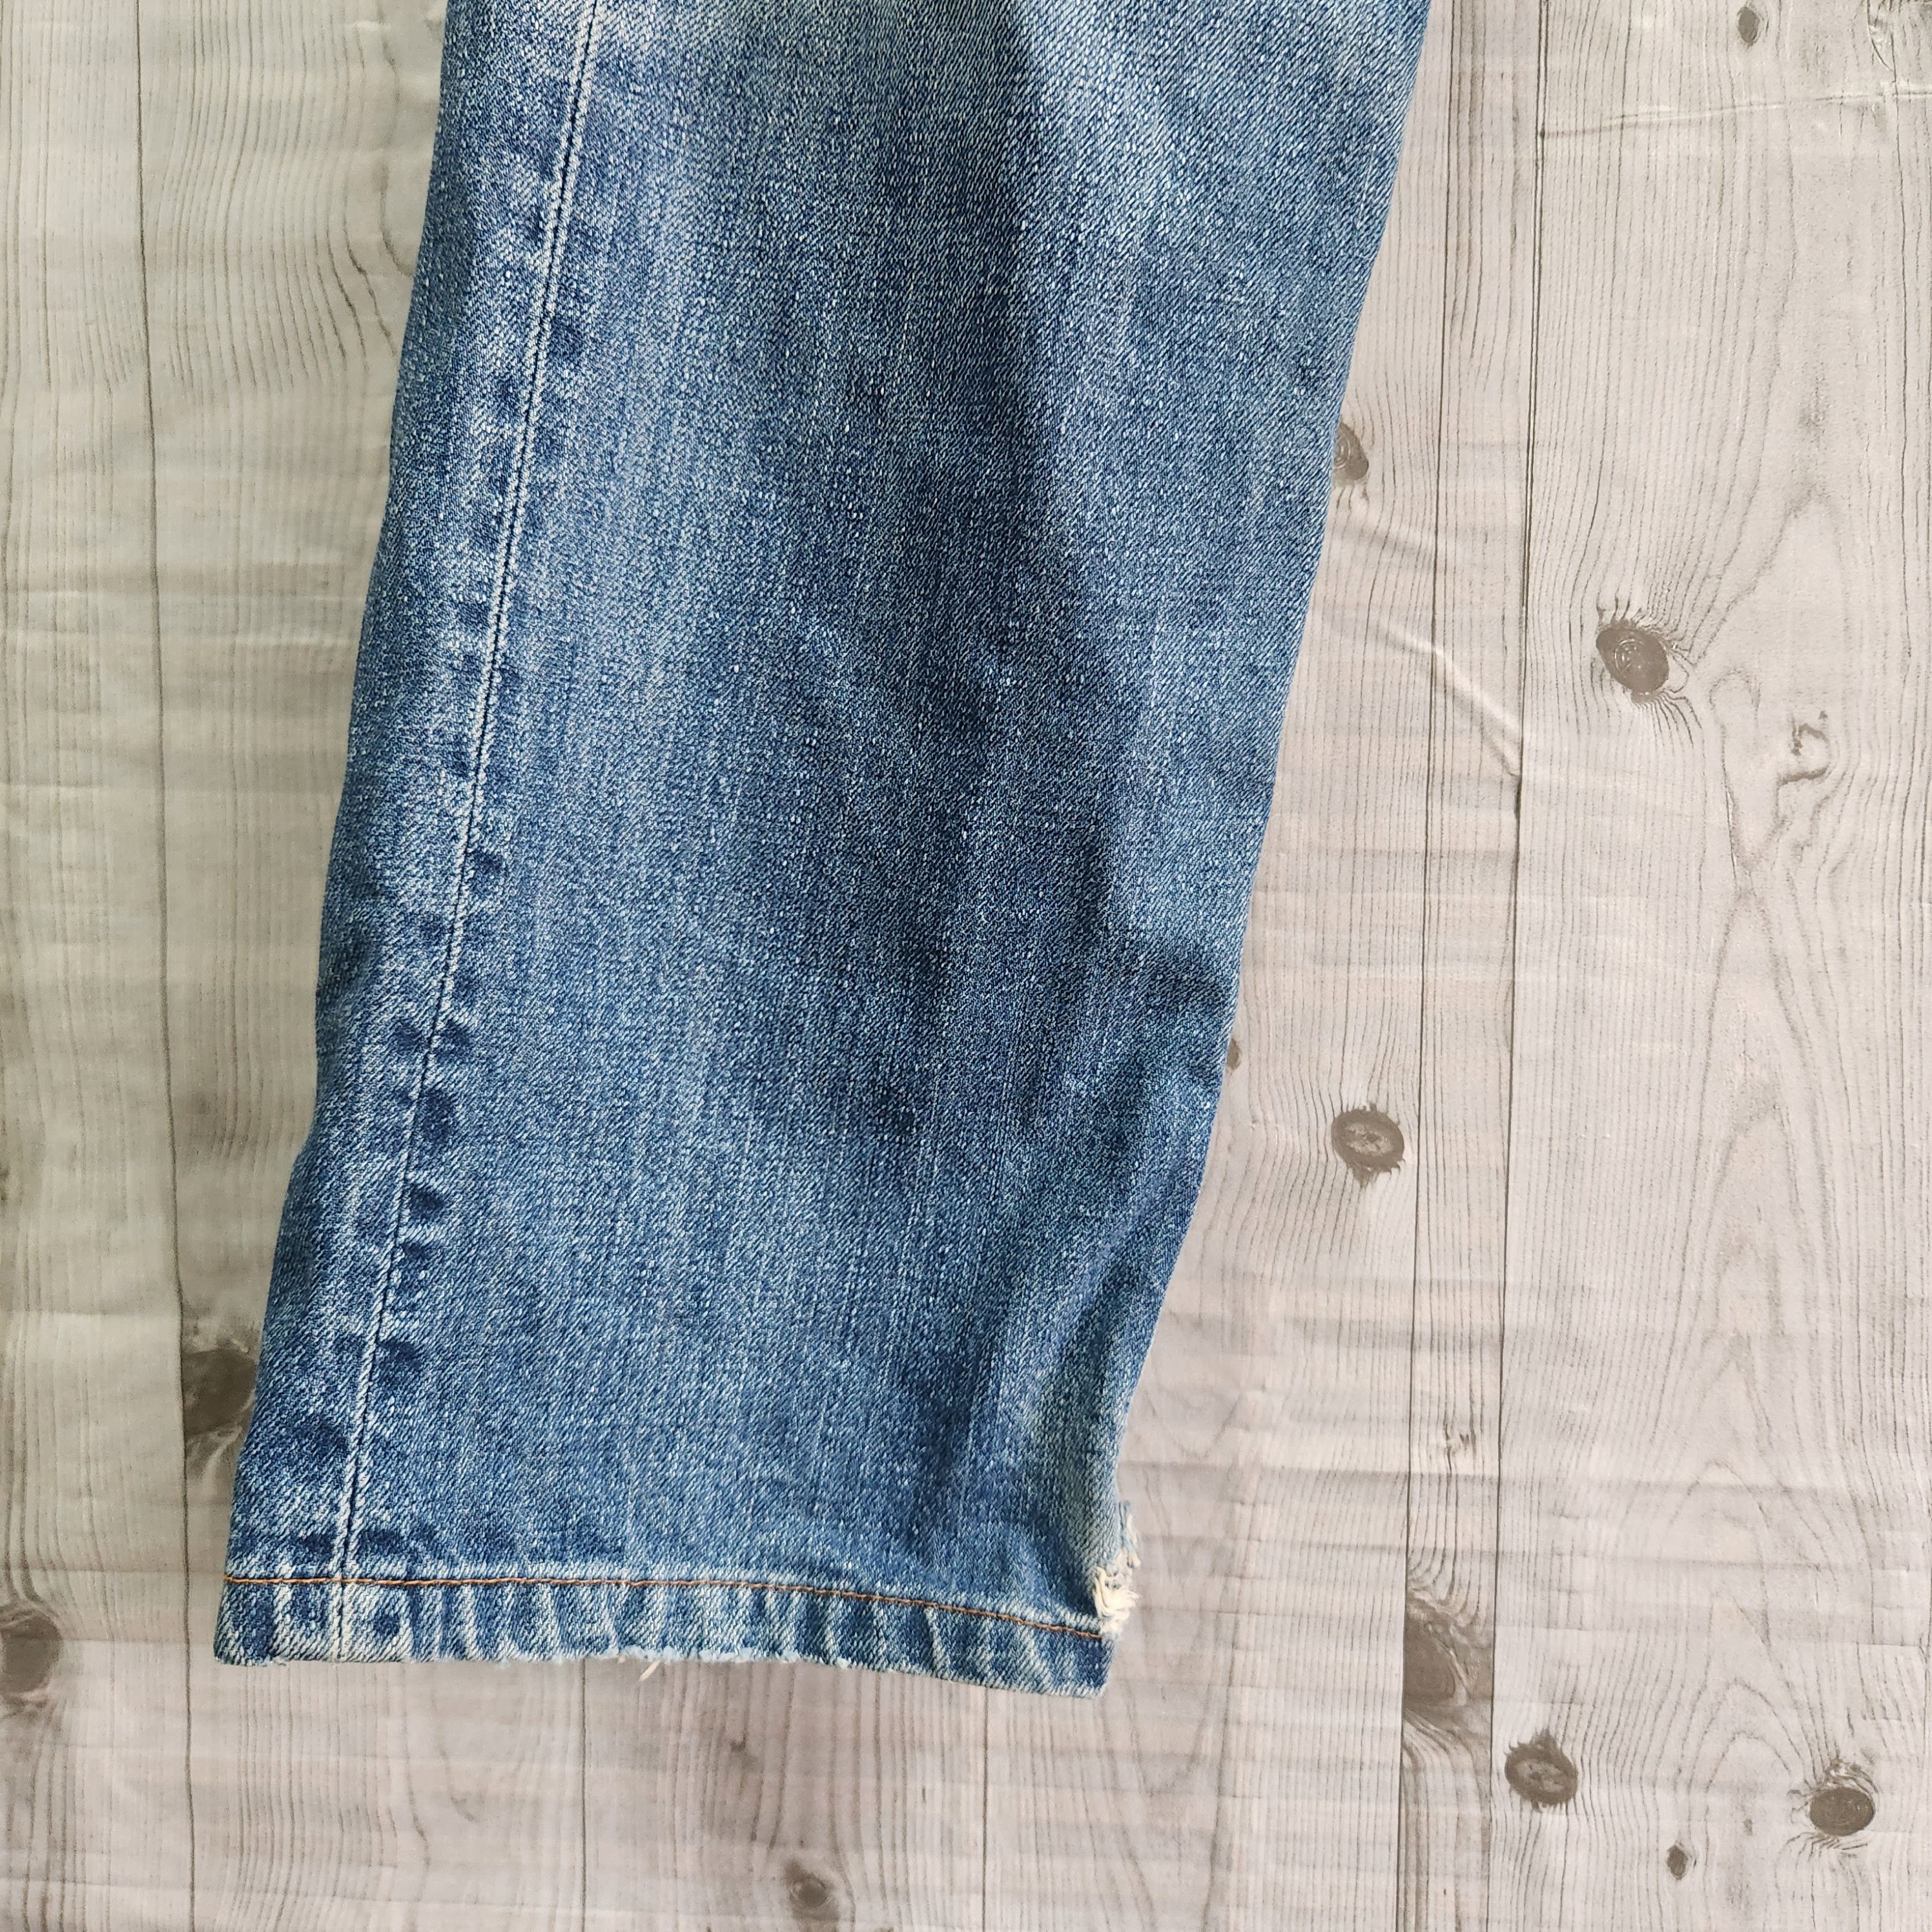 Levis 502 Vintage Distressed Ripped Denim Jeans Year 2002 - 8